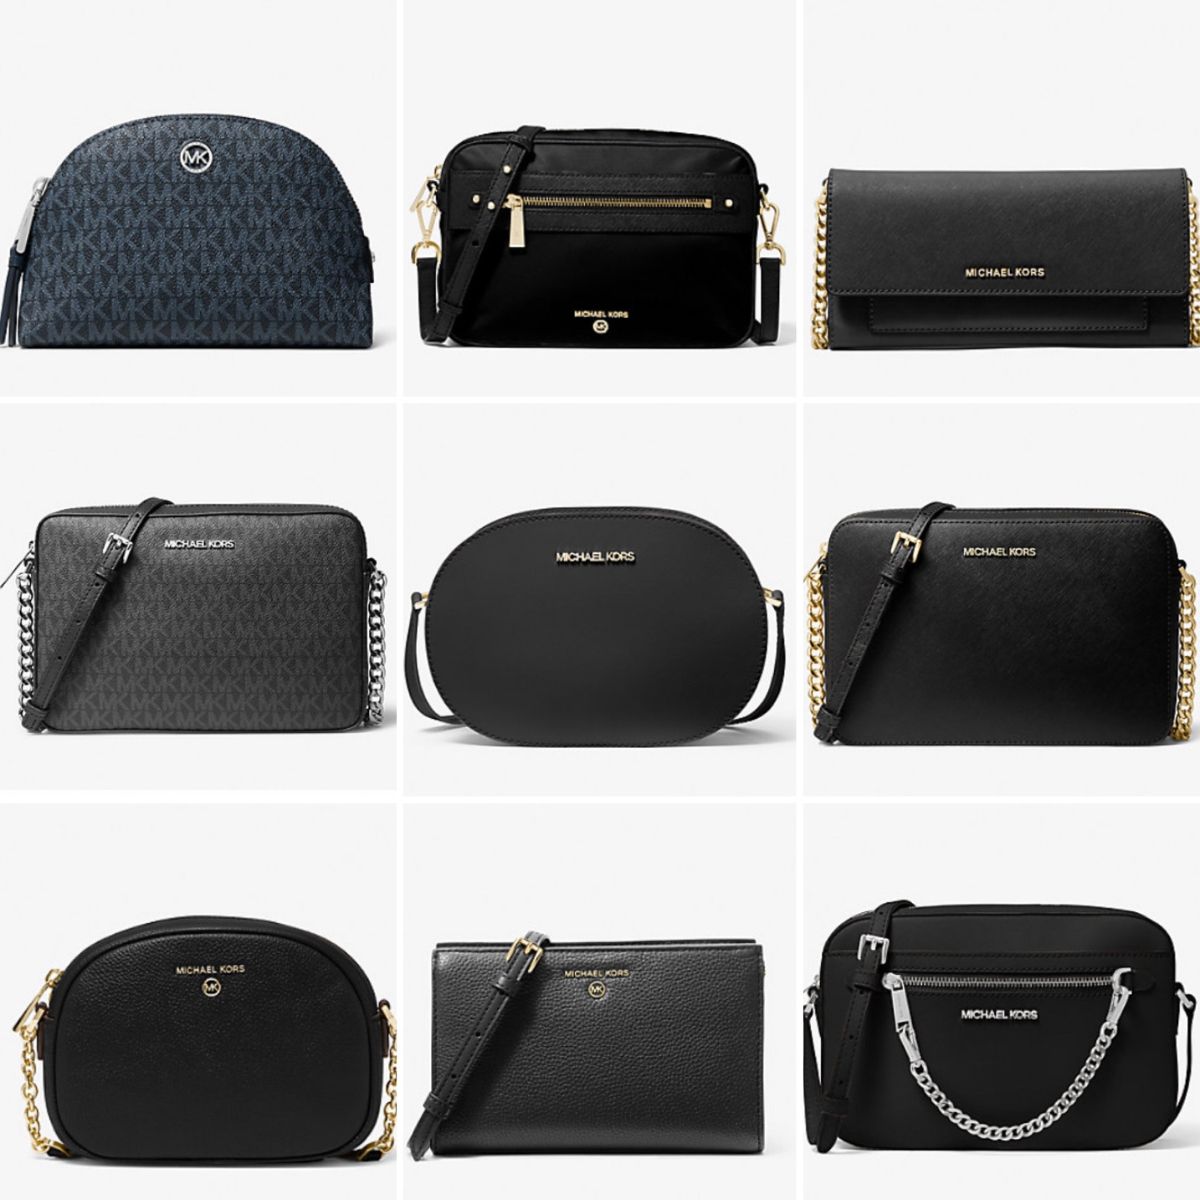 Michael Kors semi-annual sale, Handbags for$69 and under